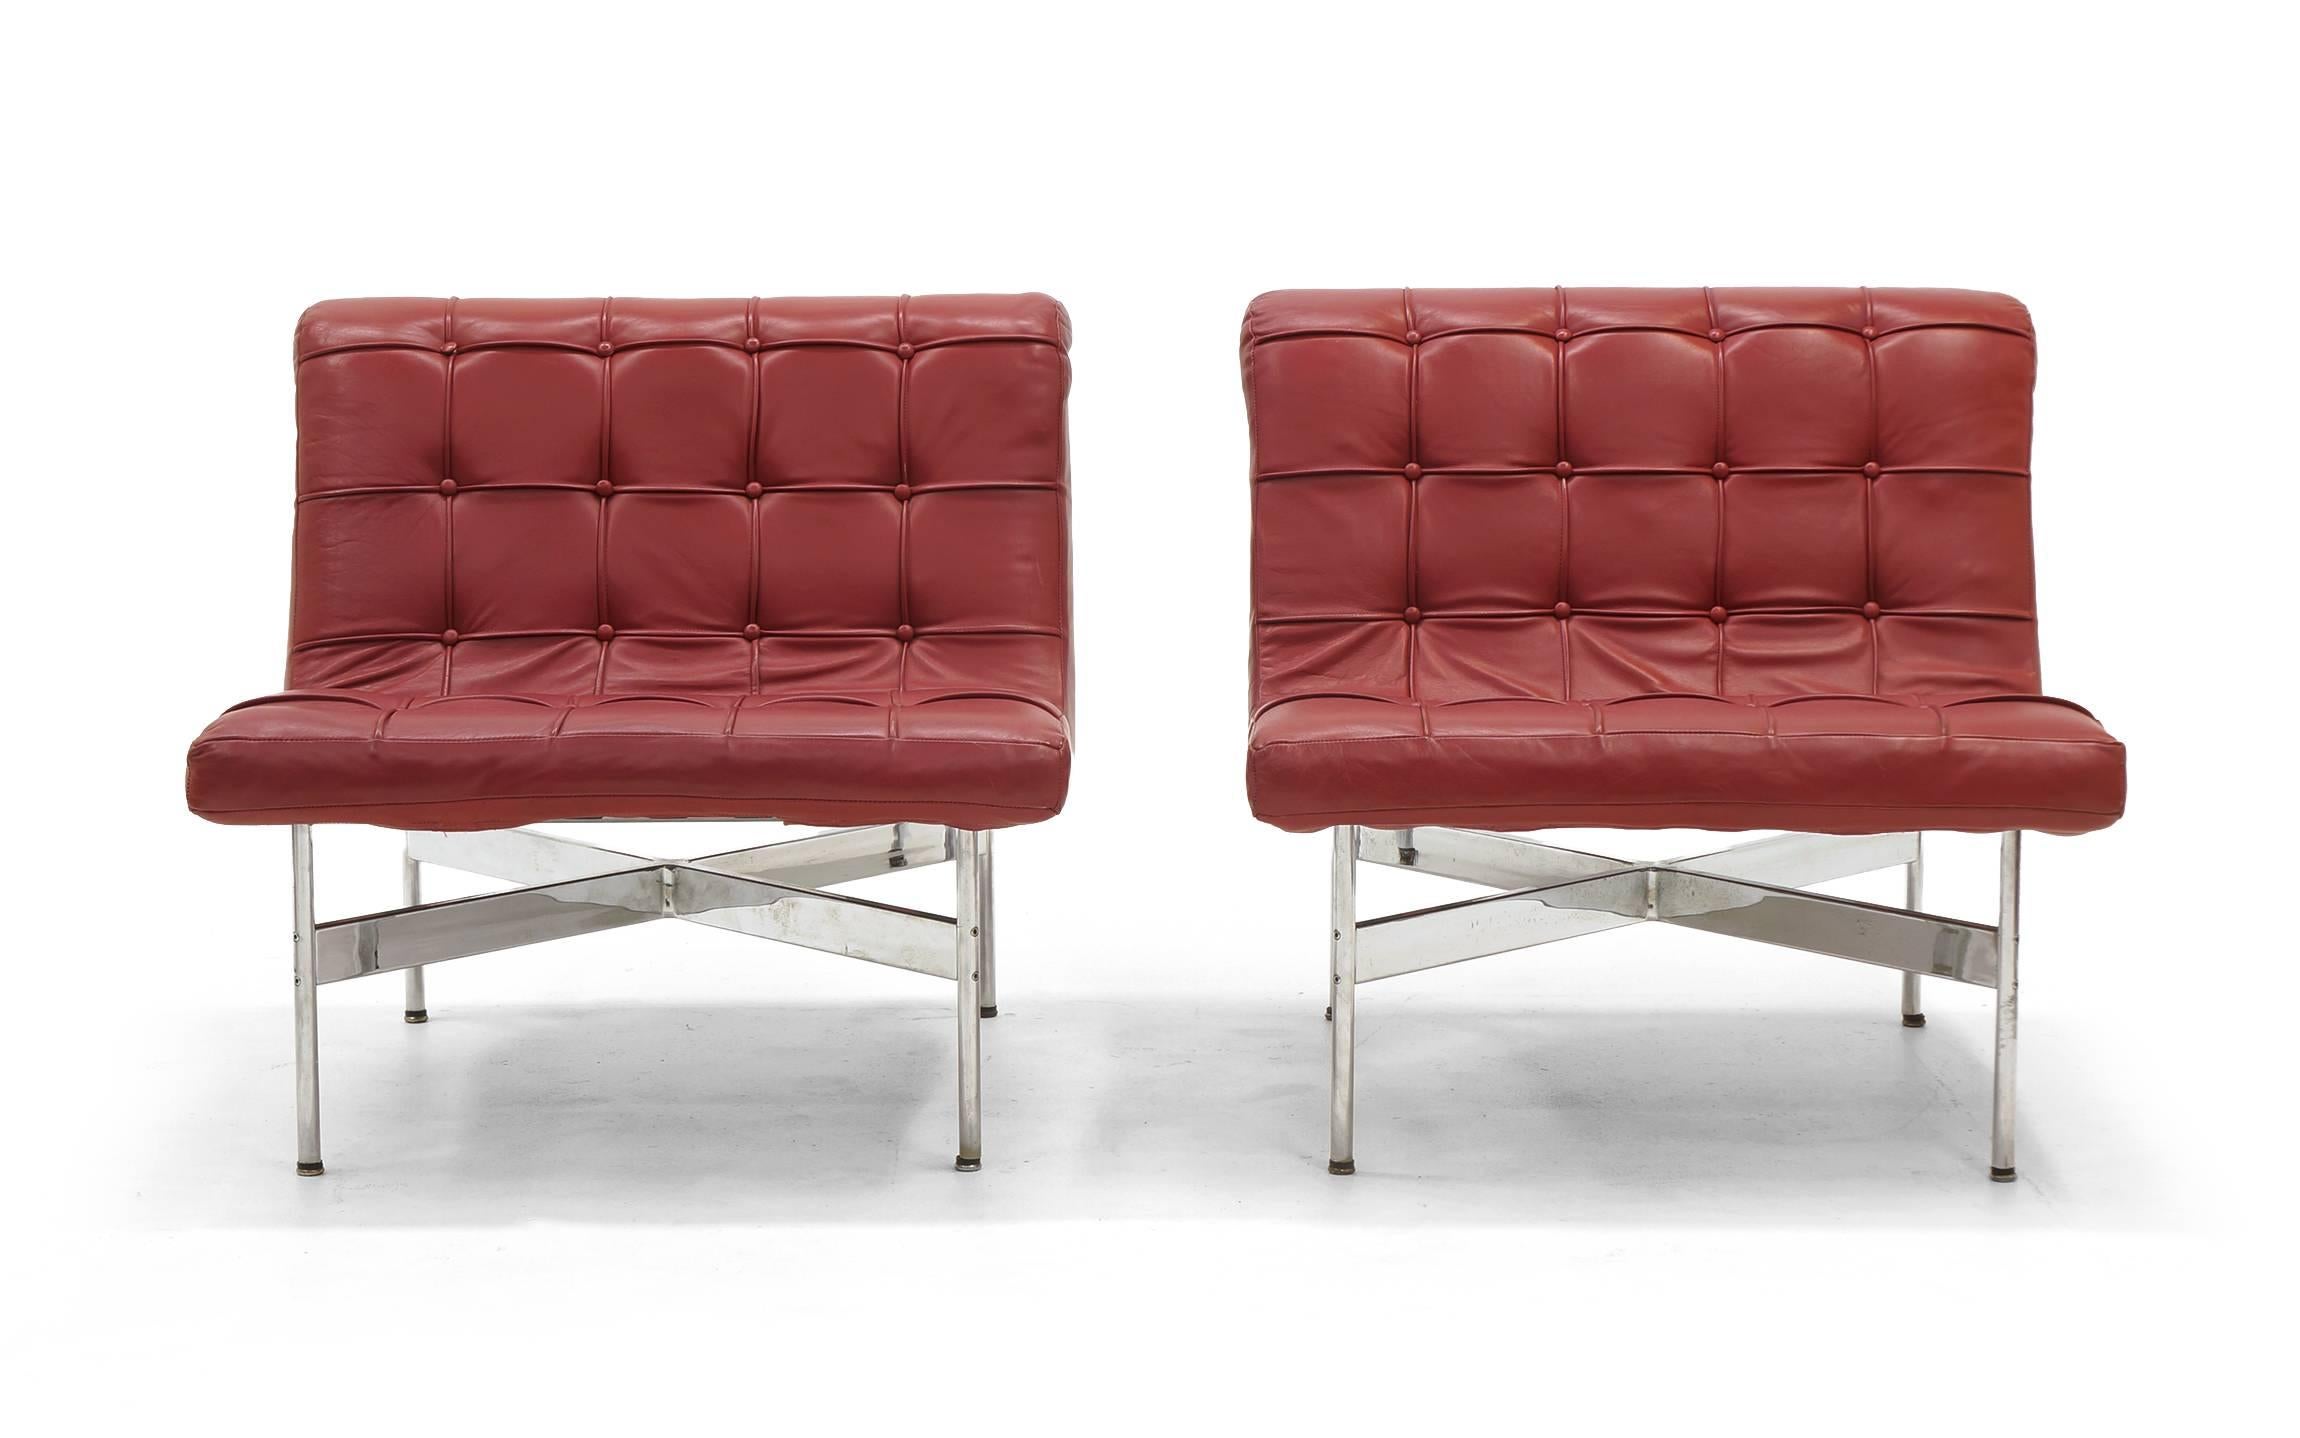 A pair of lounge chairs from the Architectural Group one line designed by William Katavolos, Ross Littell and Douglas Kelley for Laverne International. Original deep red color leather. Beautiful pair.